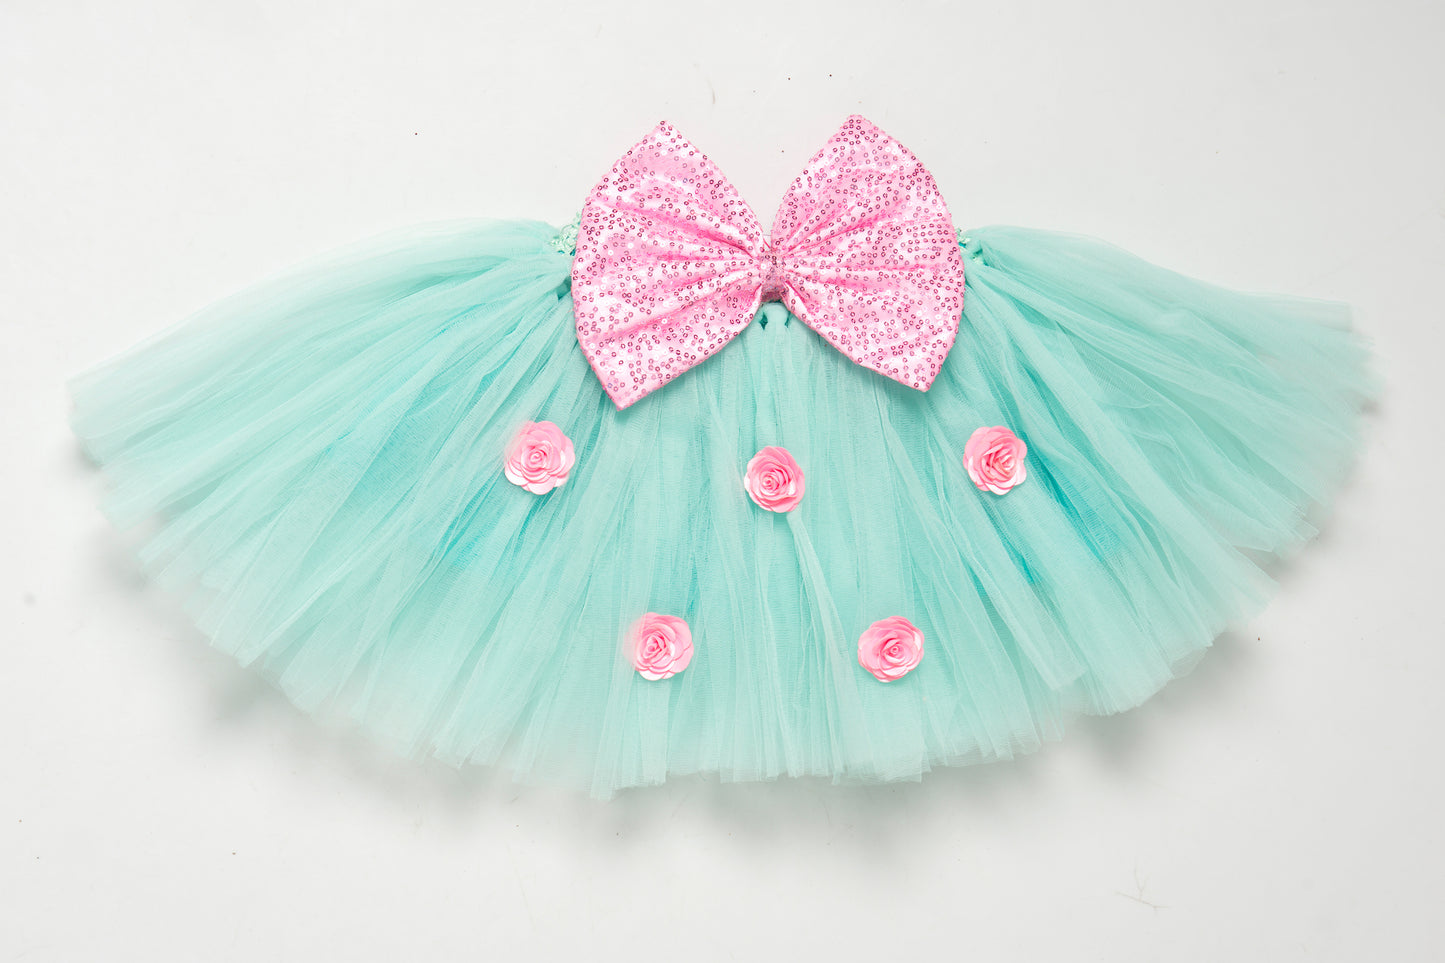 Aqua and Pink  Tutu Skirt with Sequins Bow